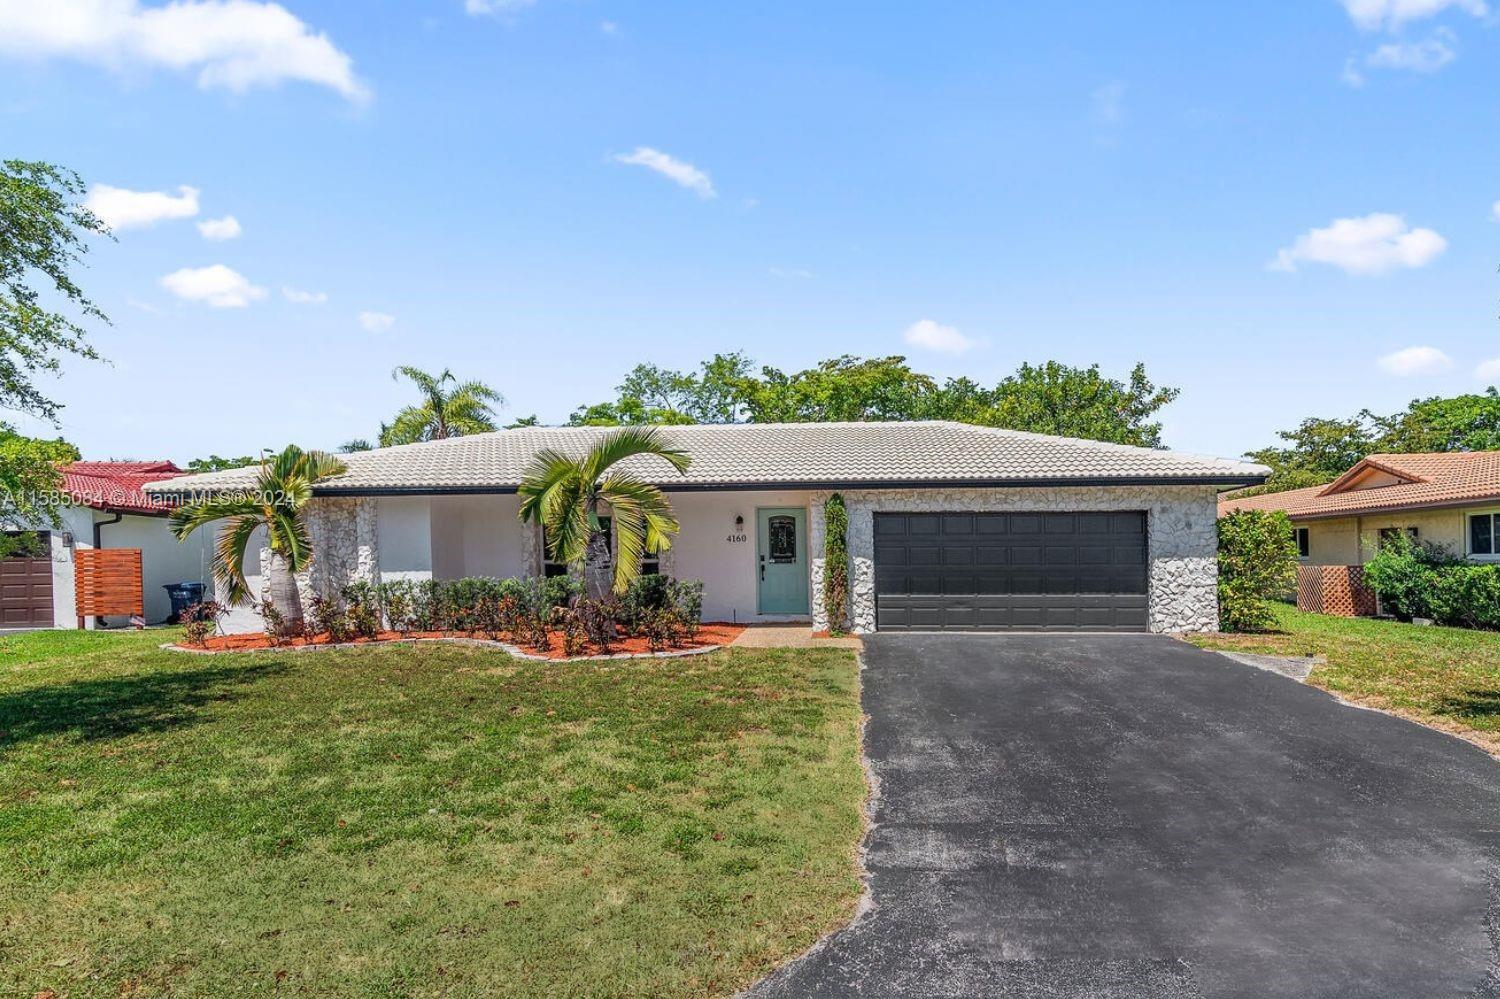 4160 Nw 113th Ave, Coral Springs, Broward County, Florida - 3 Bedrooms  
2 Bathrooms - 